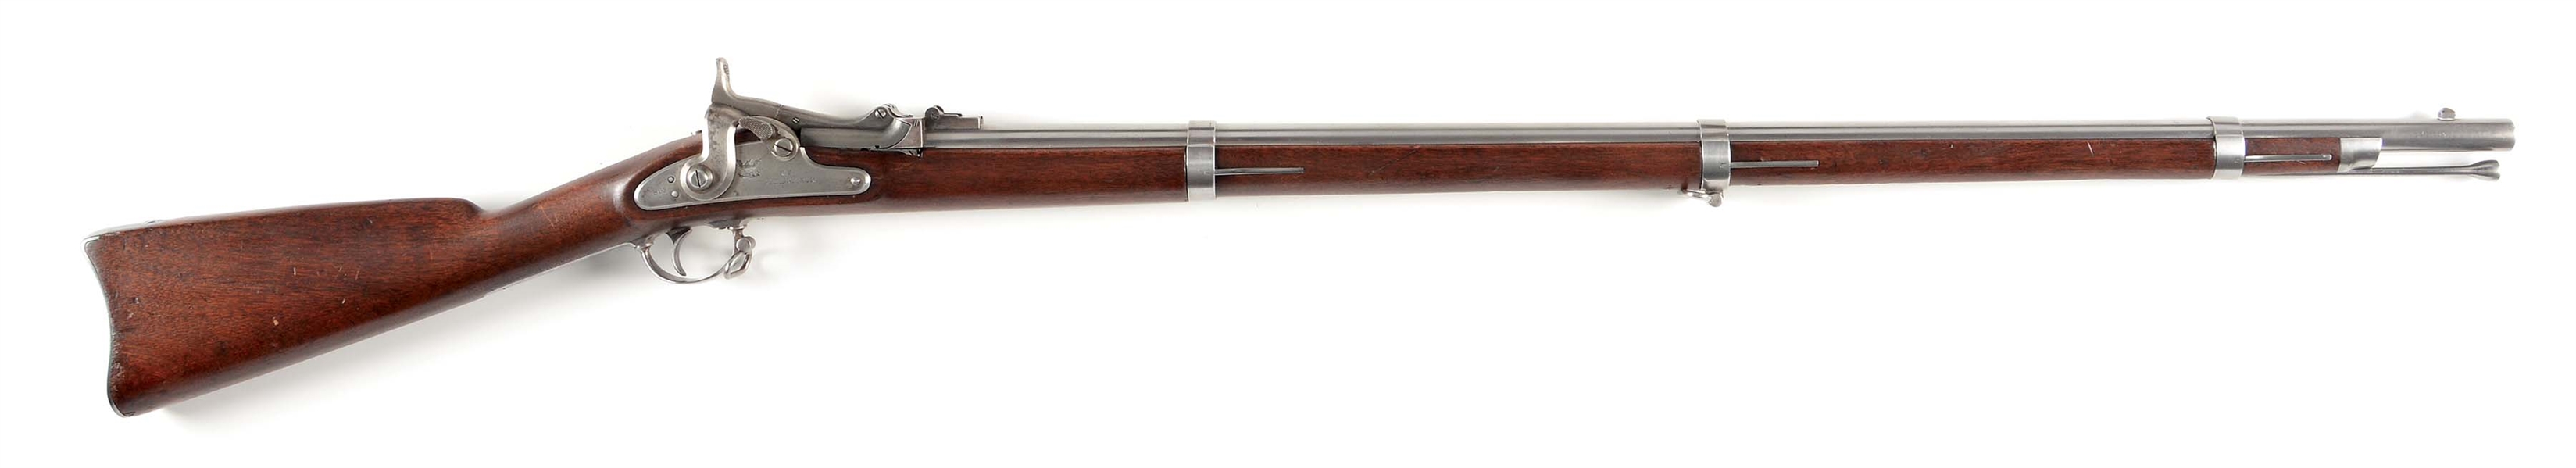 (A) US MODEL 1865 SPRINGFIELD MUSKET RIFLE - 1ST ALLEN CONVERSION.